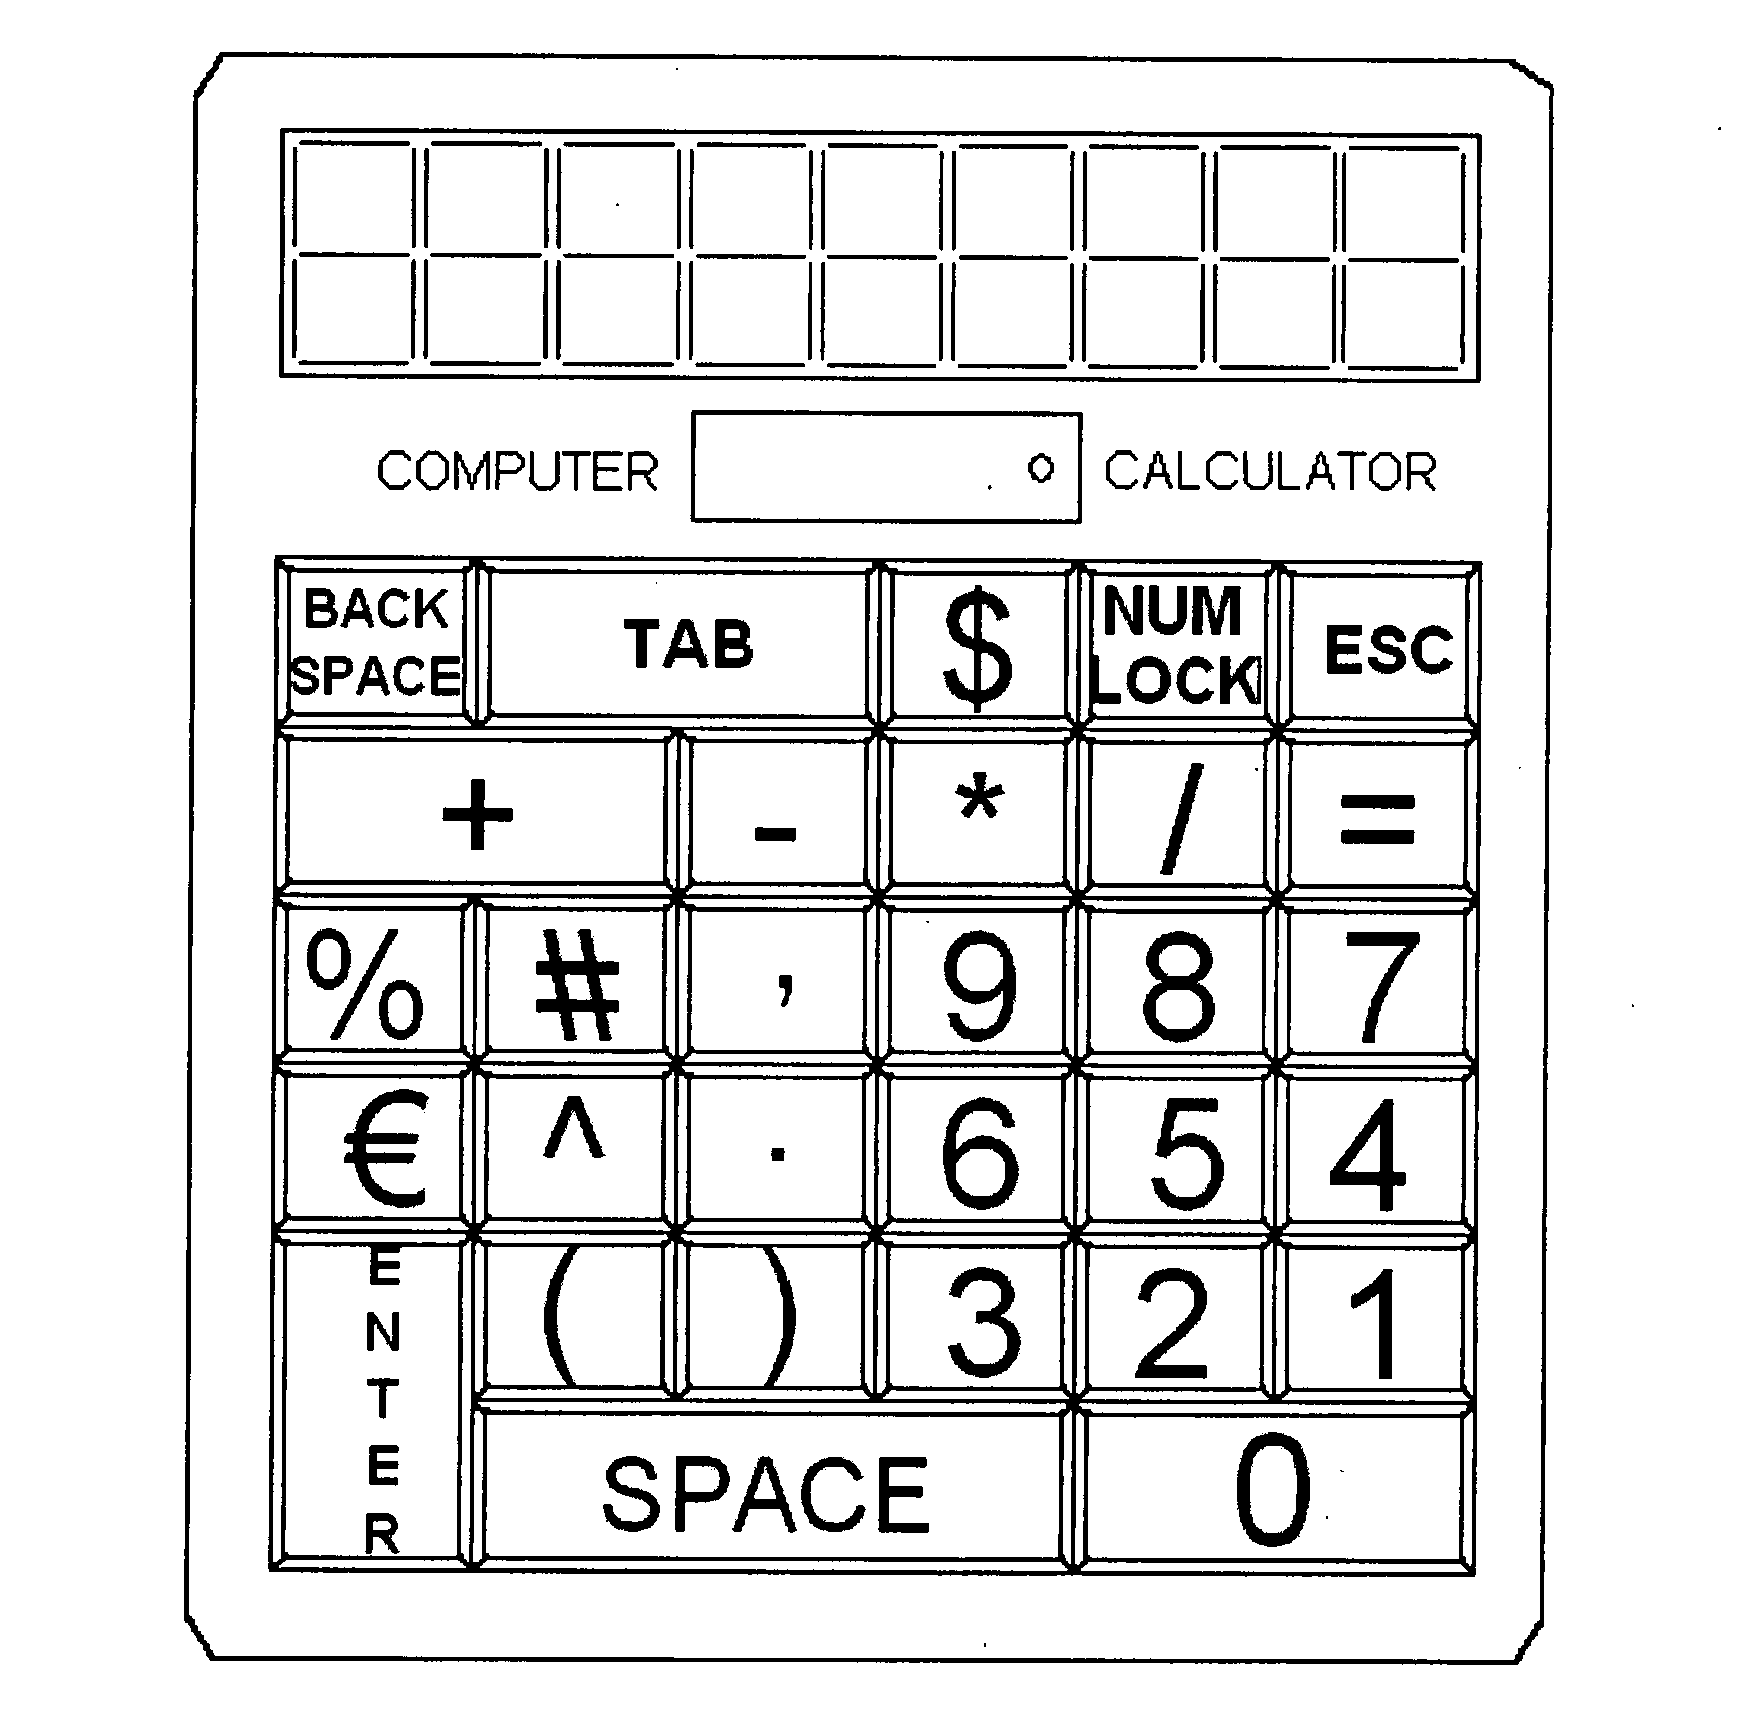 Computer keypad for improved input efficiency